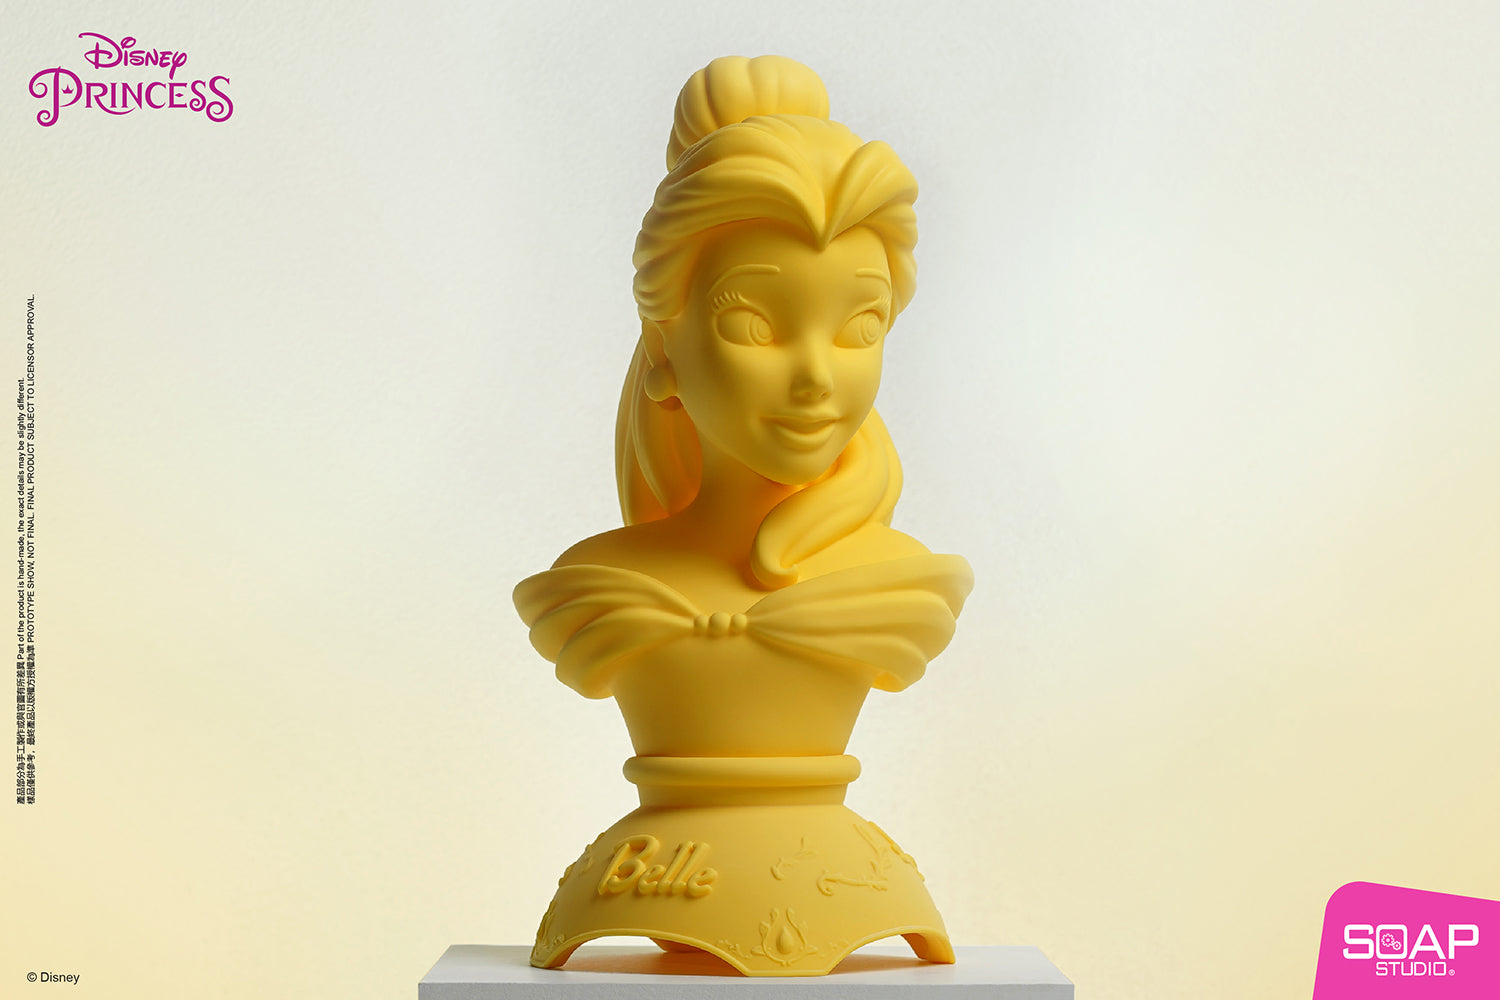 Soap Studio DY041 Disney Princess Love at First Sight Belle Bust